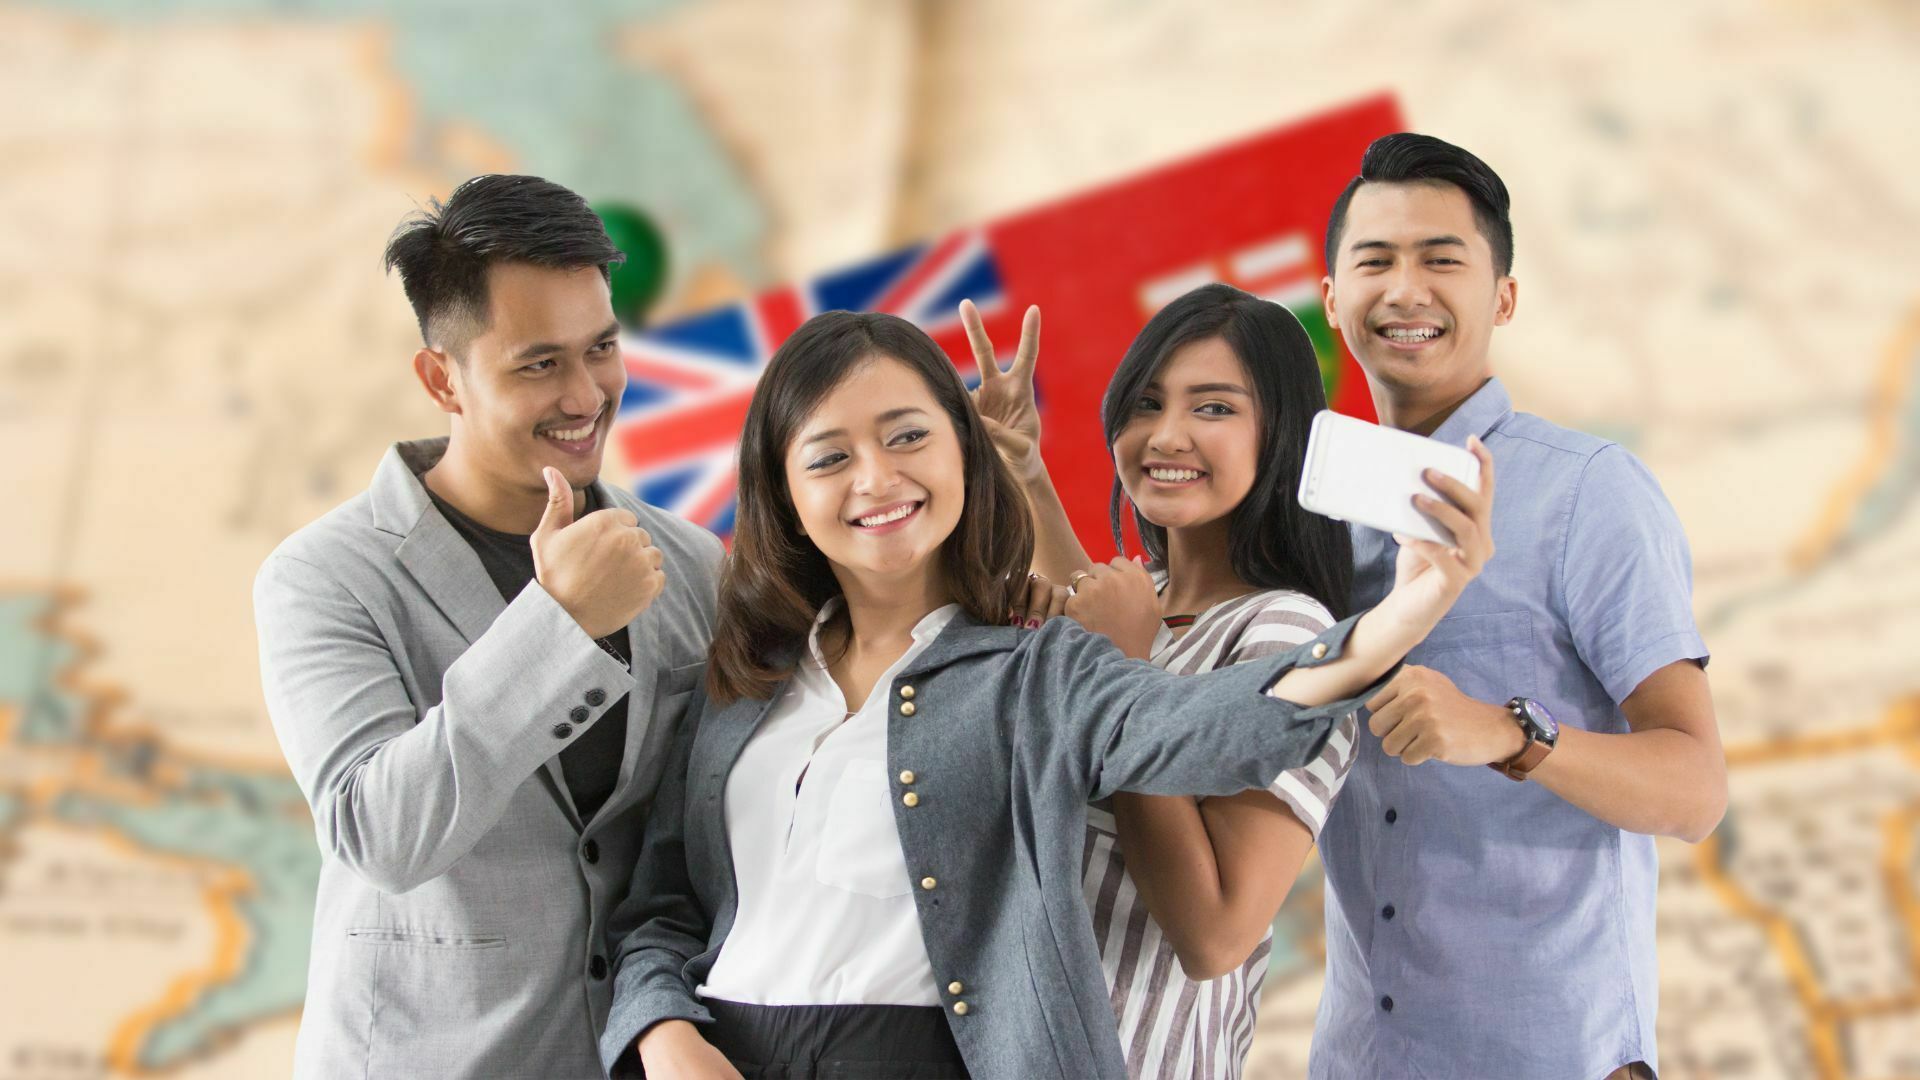 Ontario Immigration Program for Workers and International Students